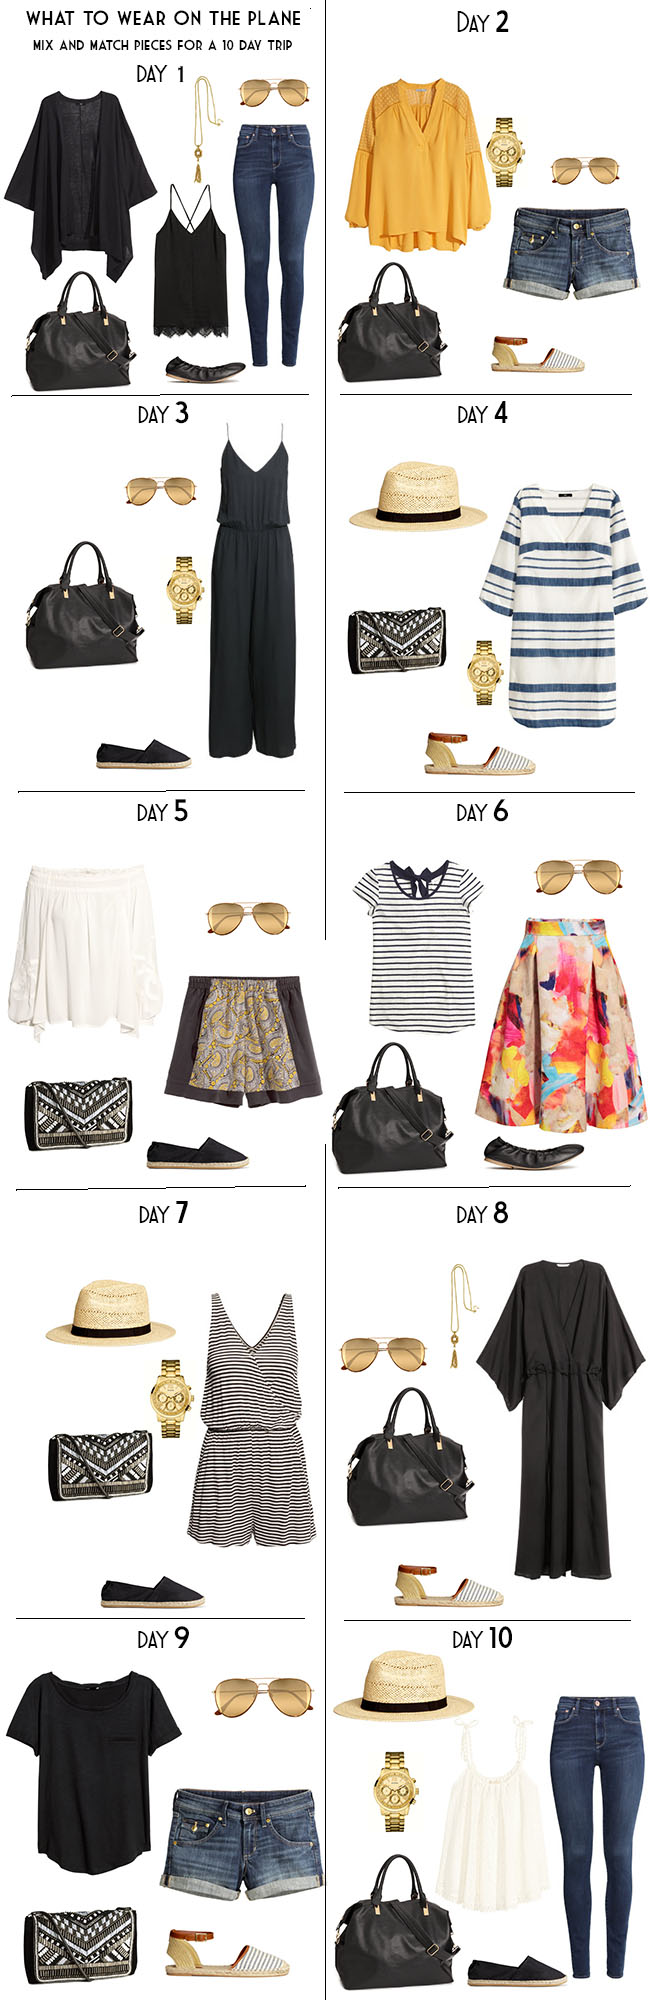 10 Days in Greece Day Looks Packing List